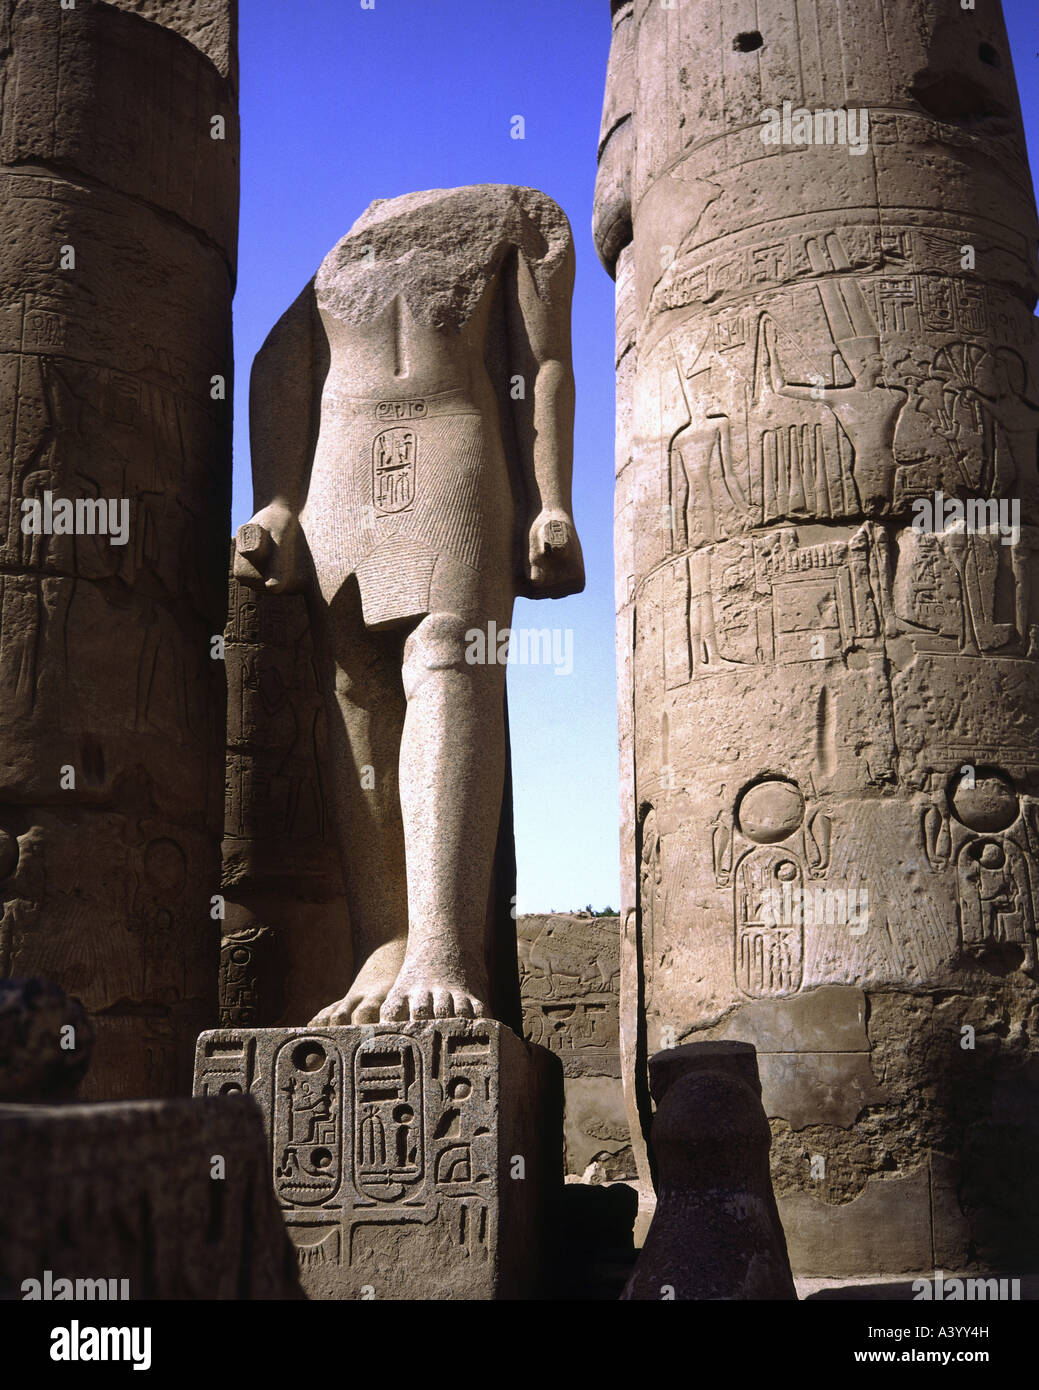 travel /geography, Egypt, Luxor, buildings, temple, Theban divine family Amun, Mut, Chons, exterior view, temple of Ramesses II, southern part, statue of pharaoh Amenhotep III, architect Amenhotep son of Hapu, 1402 - 1364 B.C., extensions under Ramesses II, 1303 - 1236 B.C., historic, historical, Africa, architecture, temples, ancient world, New Kingdom, 18th / 19th dynasty, 15th - 13th century B.C., column, columns, statues, sculpture, sculptures, ancient world, Stock Photo